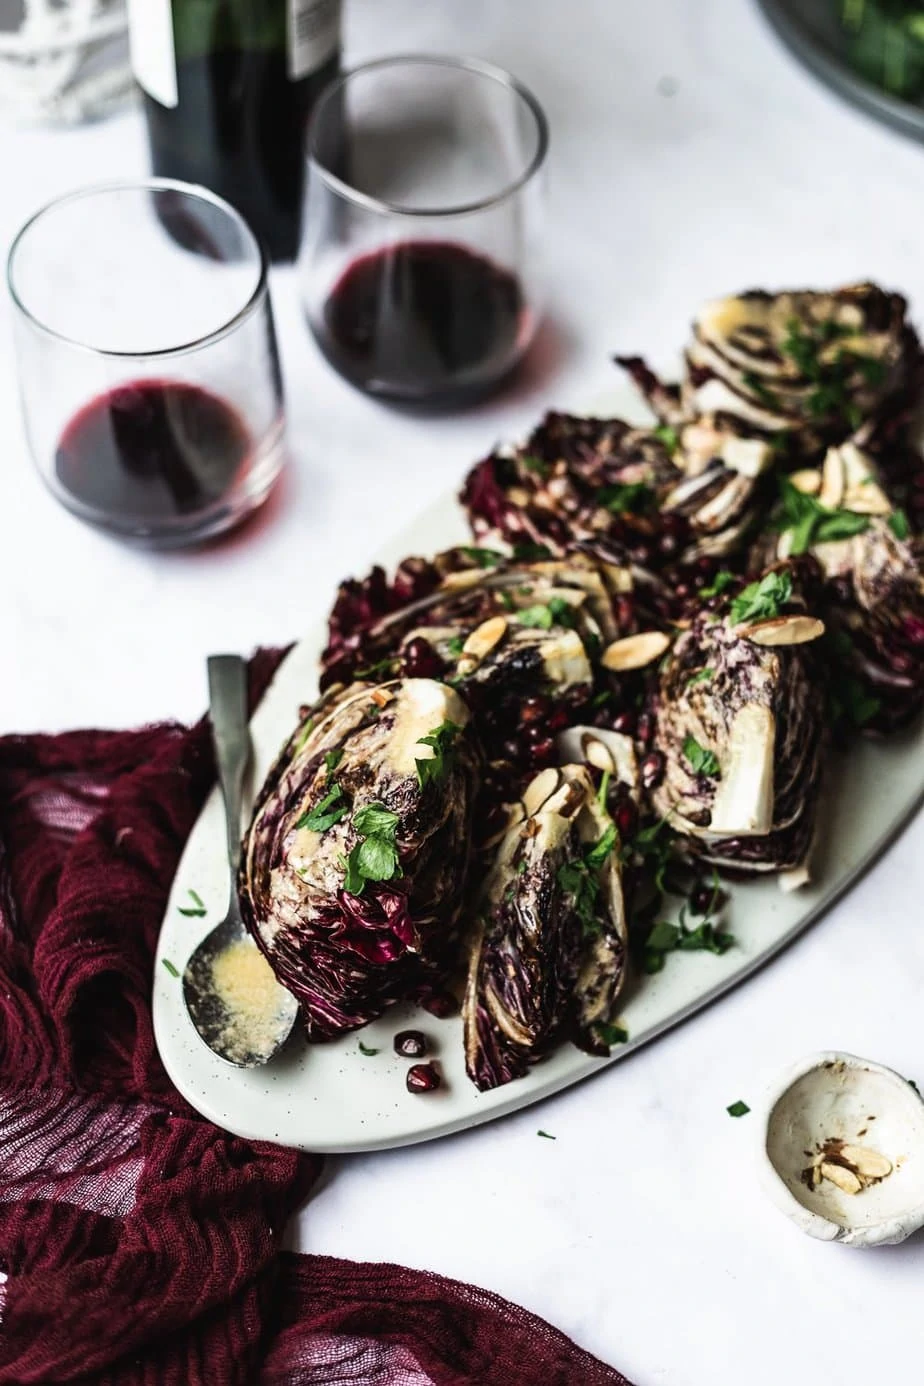 radicchio wedge salad on platter with dressing and wine glasses